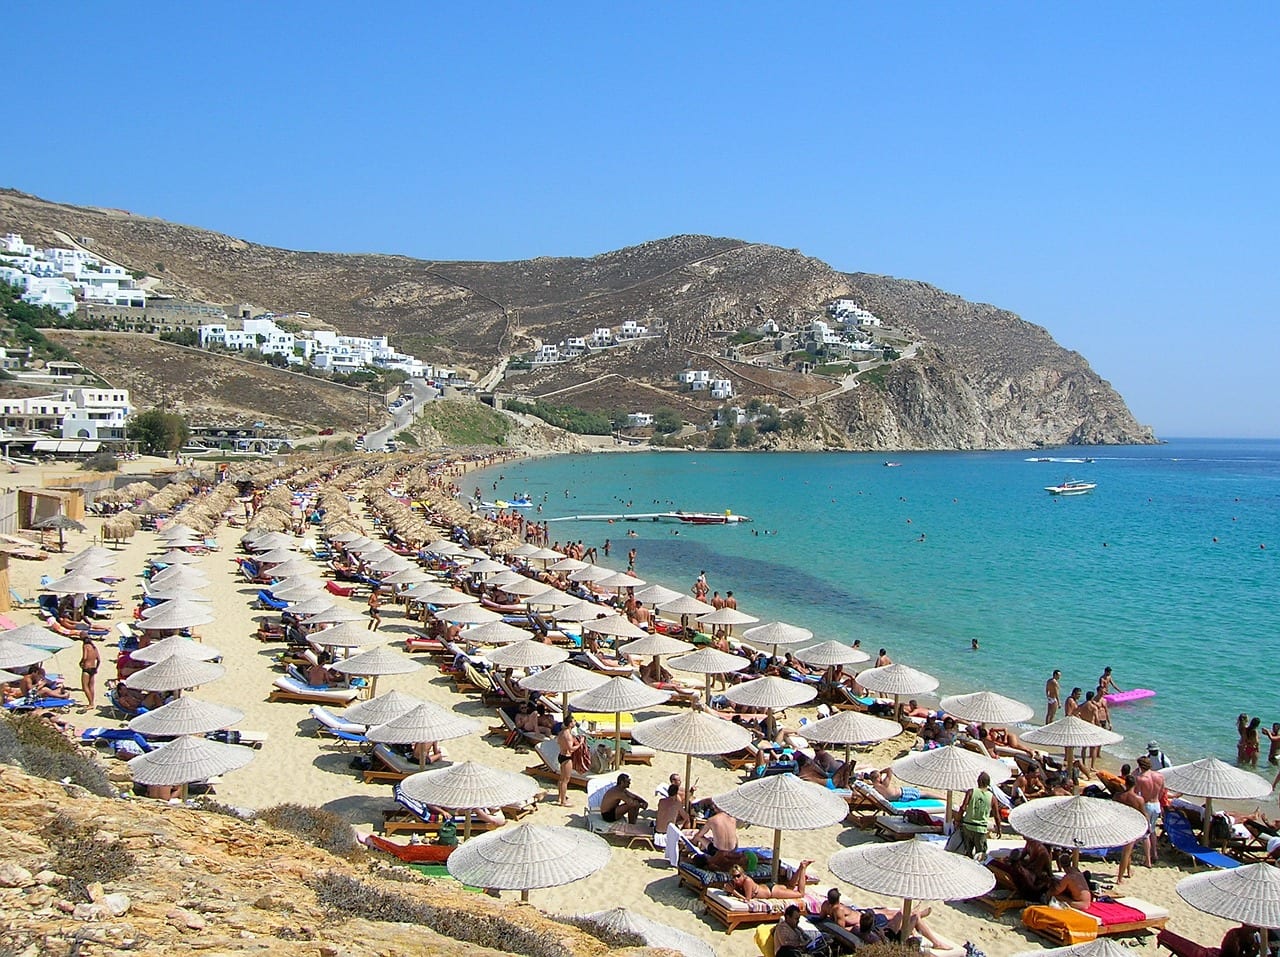 The best beaches in Mykonos are organised with umbrellas for shade